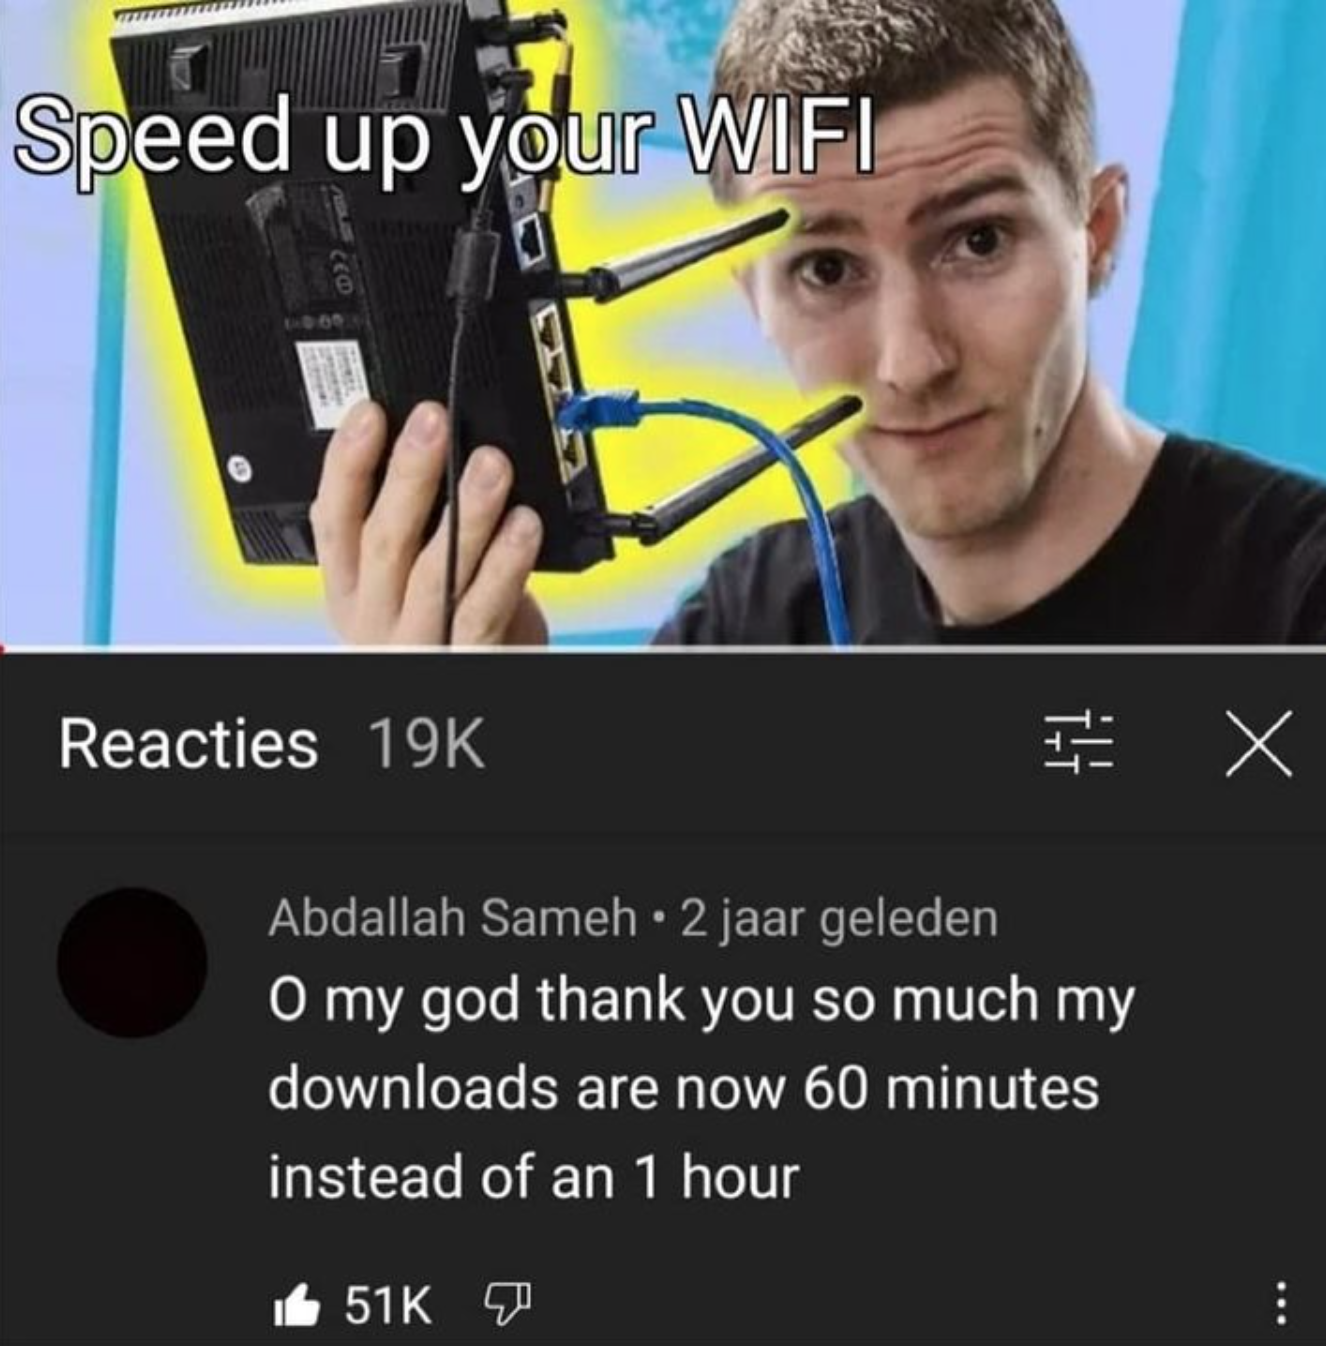 funny gaming memes - communication - Speed up your Wifi Reacties 19K E X Abdallah Sameh. 2 jaar geleden O my god thank you so much my downloads are now 60 minutes instead of an 1 hour it 51K 7